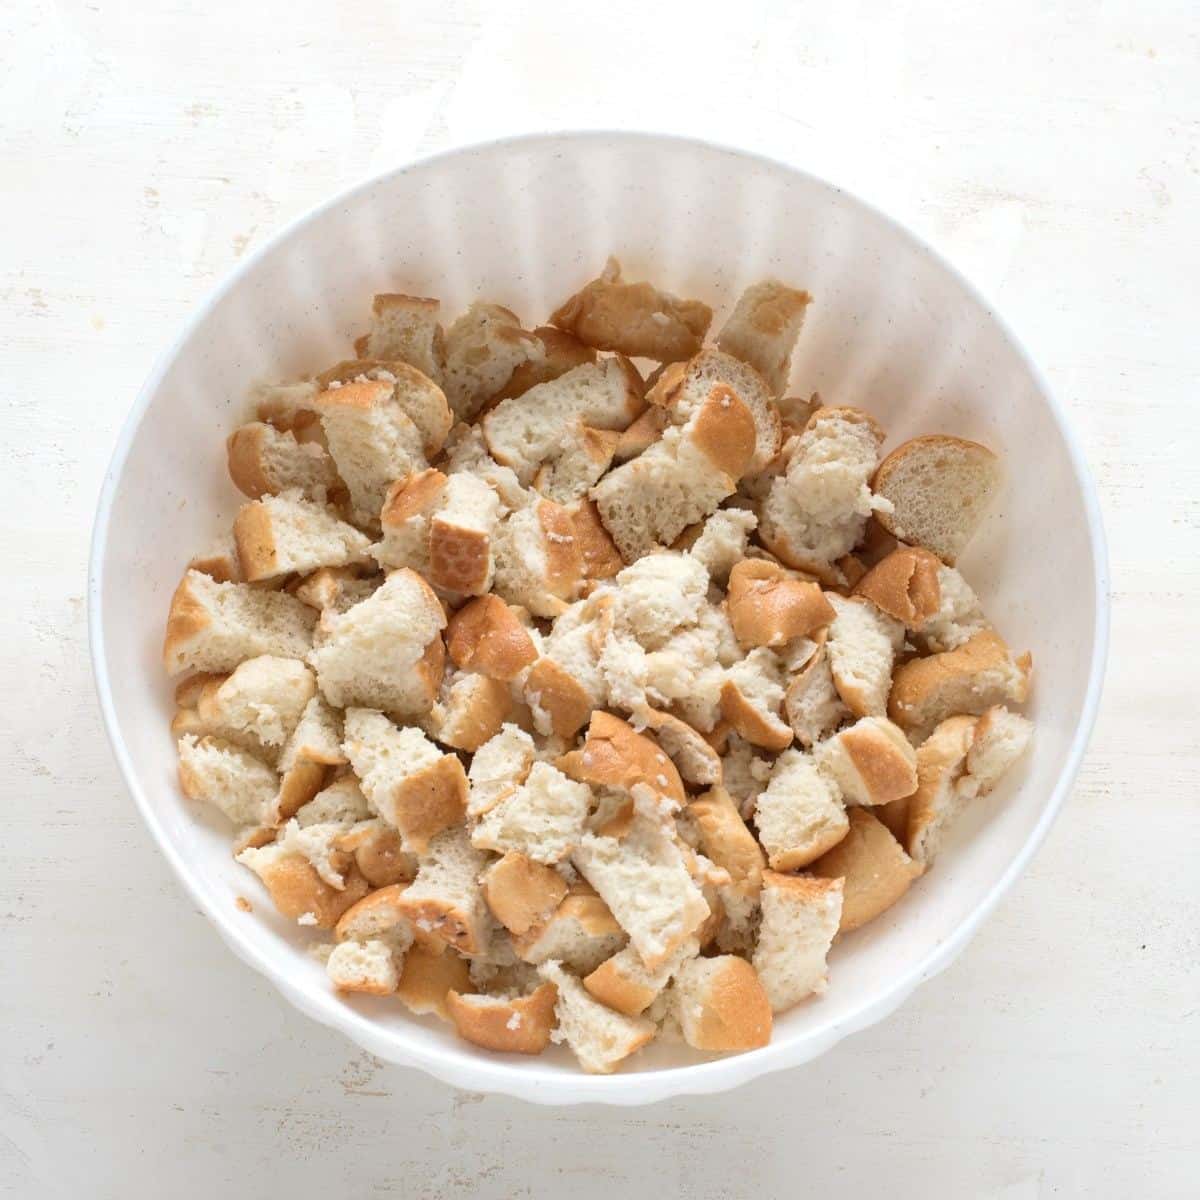 White bread cut into cubes, in a white bowl, soaked in milk.